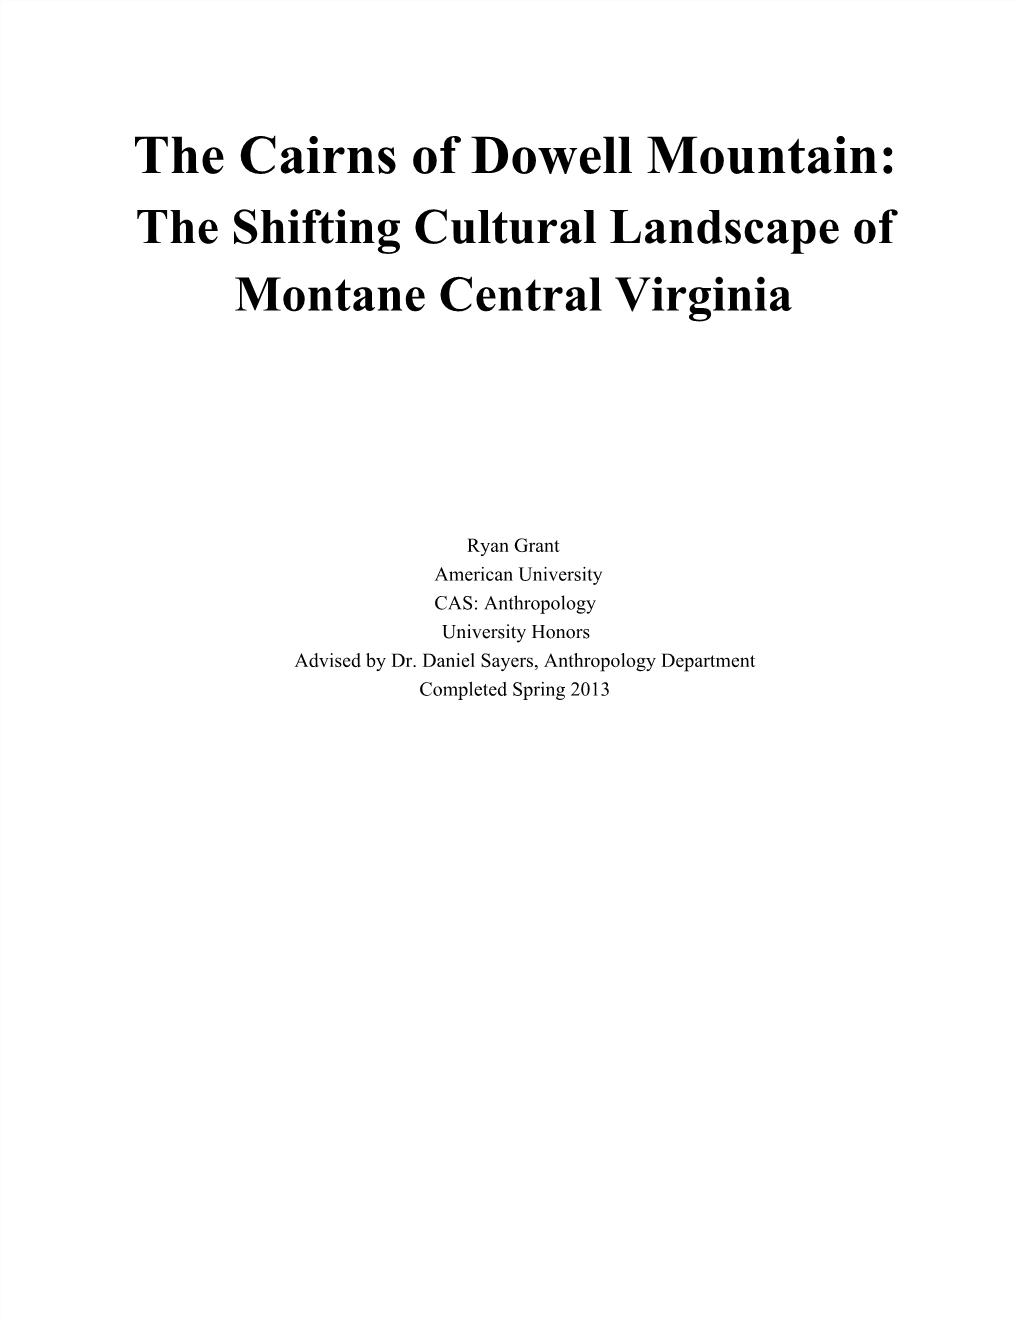 The Cairns of Dowell Mountain: the Shifting Cultural Landscape of Montane Central Virginia